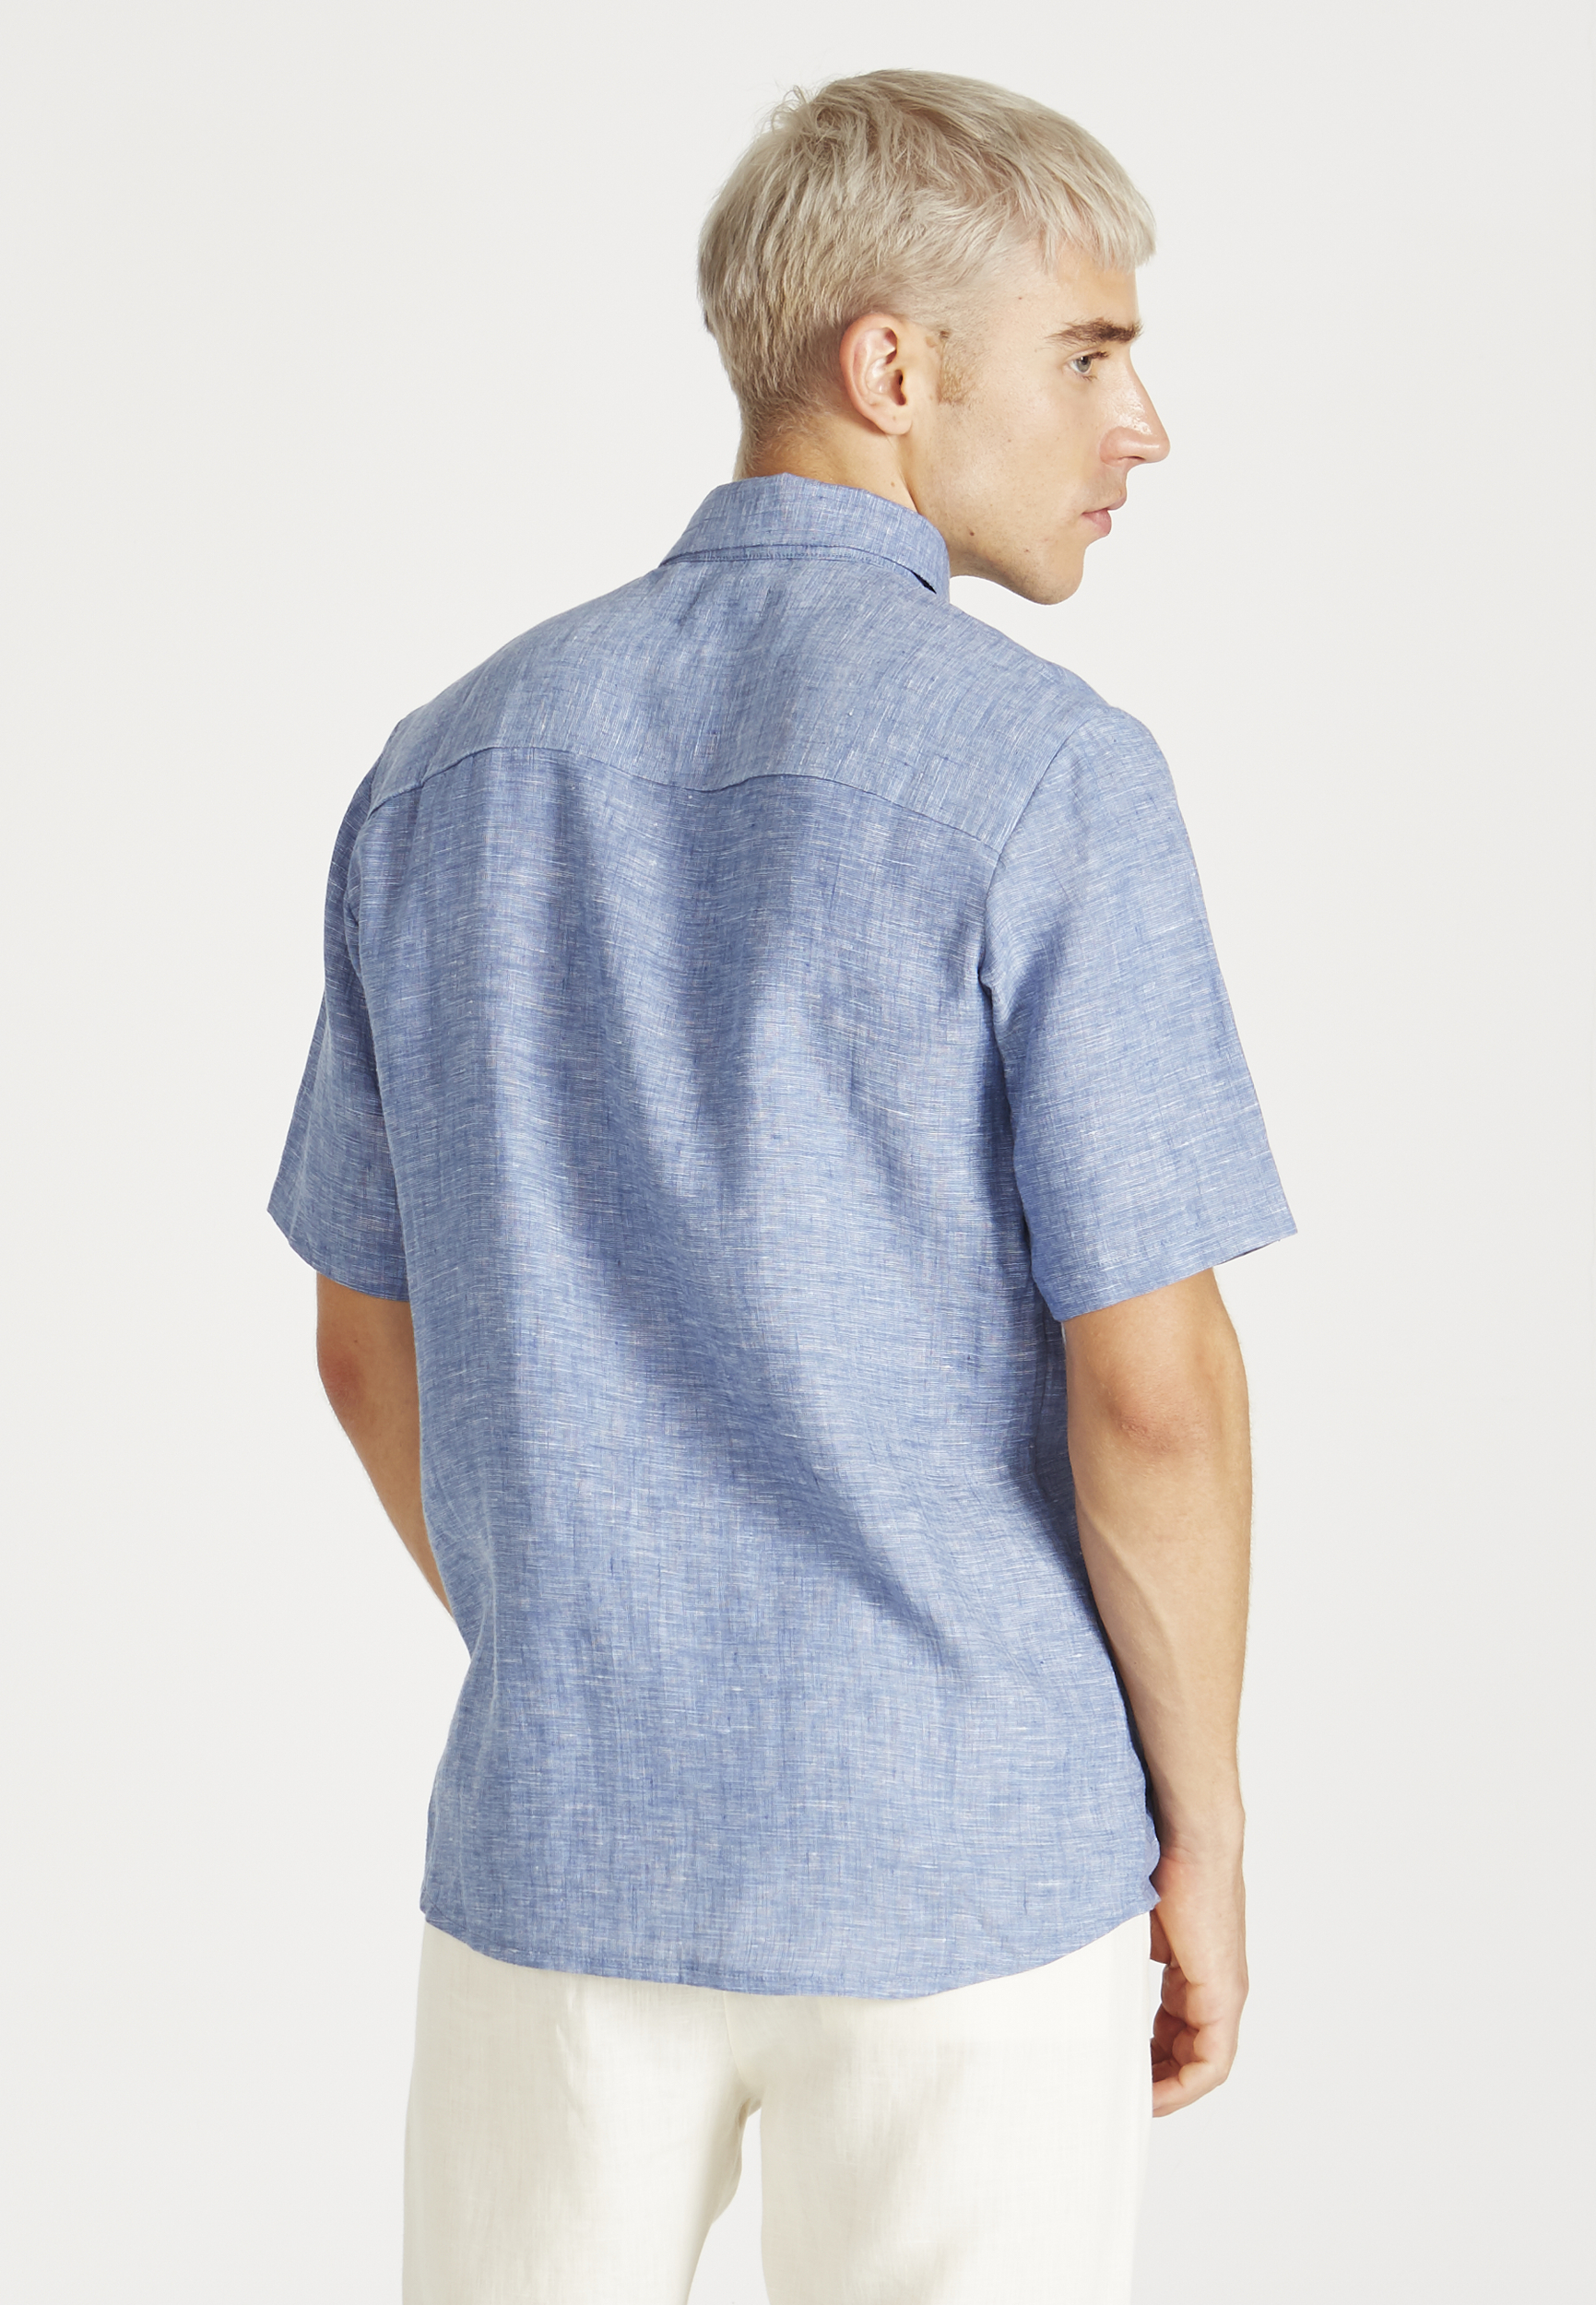 GB 1029 - Blue (Structure, Linen) - Extra 1